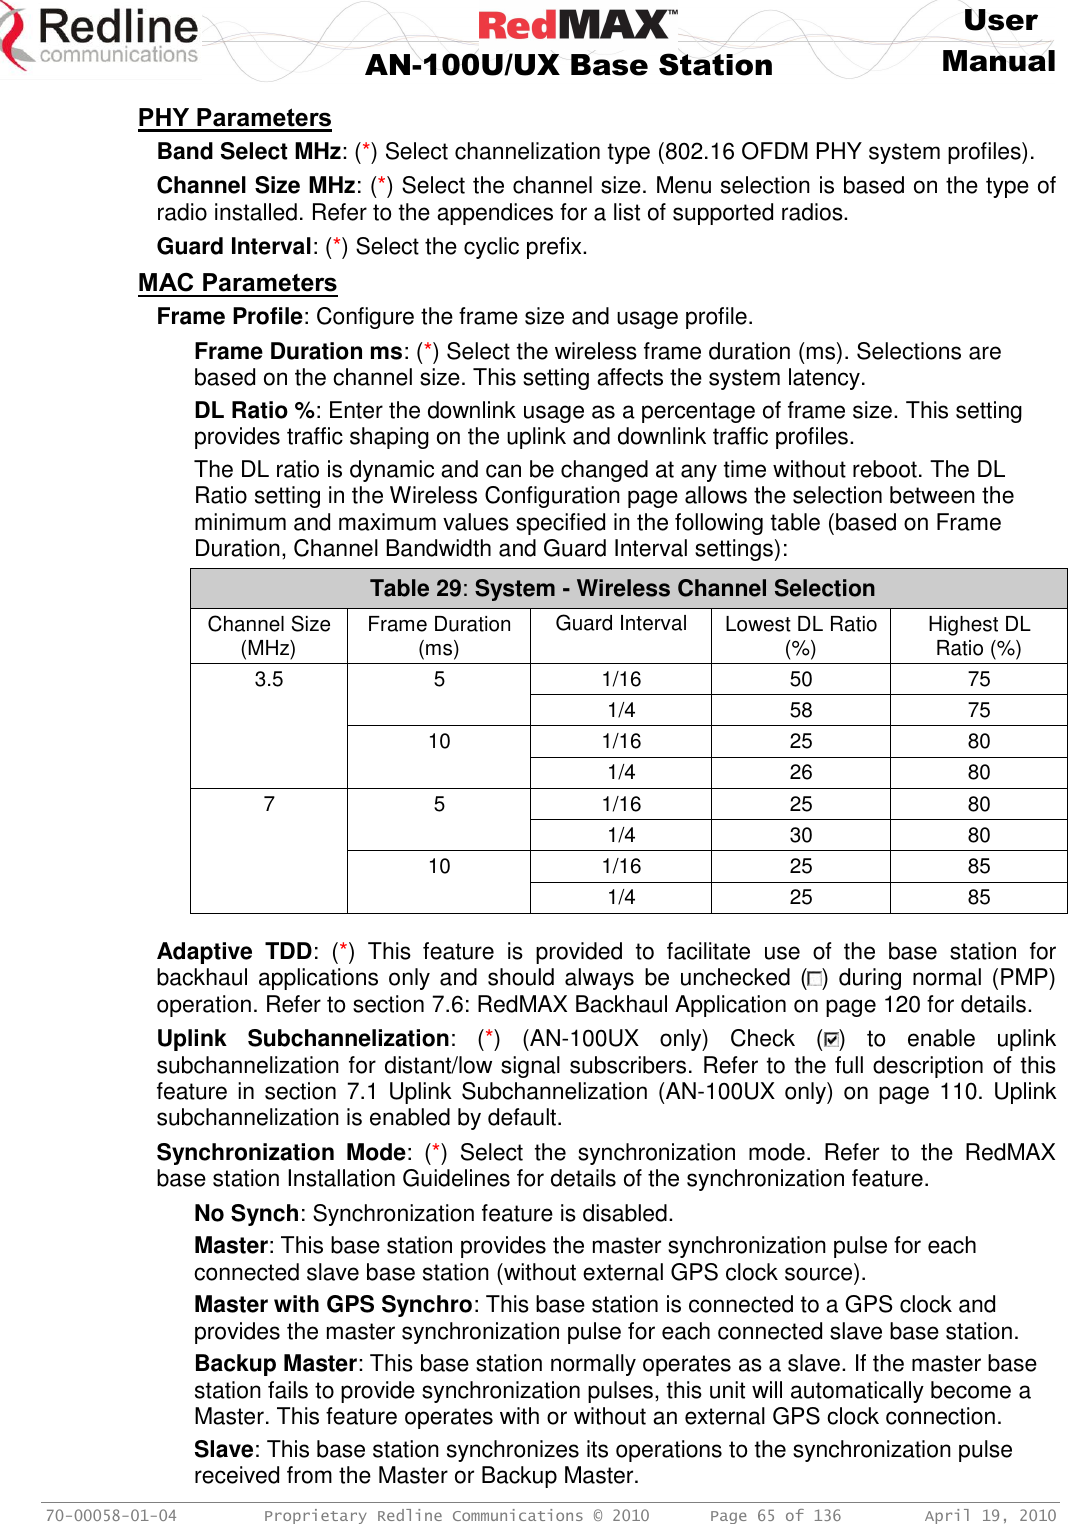     User  AN-100U/UX Base Station Manual   70-00058-01-04  Proprietary Redline Communications © 2010   Page 65 of 136  April 19, 2010 PHY Parameters Band Select MHz: (*) Select channelization type (802.16 OFDM PHY system profiles). Channel Size MHz: (*) Select the channel size. Menu selection is based on the type of radio installed. Refer to the appendices for a list of supported radios. Guard Interval: (*) Select the cyclic prefix. MAC Parameters Frame Profile: Configure the frame size and usage profile. Frame Duration ms: (*) Select the wireless frame duration (ms). Selections are based on the channel size. This setting affects the system latency. DL Ratio %: Enter the downlink usage as a percentage of frame size. This setting provides traffic shaping on the uplink and downlink traffic profiles. The DL ratio is dynamic and can be changed at any time without reboot. The DL Ratio setting in the Wireless Configuration page allows the selection between the minimum and maximum values specified in the following table (based on Frame Duration, Channel Bandwidth and Guard Interval settings): Table 29: System - Wireless Channel Selection Channel Size (MHz) Frame Duration (ms) Guard Interval Lowest DL Ratio (%) Highest DL Ratio (%) 3.5 5 1/16 50 75   1/4 58 75  10 1/16 25 80   1/4 26 80 7 5 1/16 25 80   1/4 30 80  10 1/16 25 85   1/4 25 85   Adaptive  TDD:  (*)  This  feature  is  provided  to  facilitate  use  of  the  base  station  for backhaul applications only and should always be unchecked ( ) during normal (PMP) operation. Refer to section 7.6: RedMAX Backhaul Application on page 120 for details. Uplink  Subchannelization:  (*)  (AN-100UX  only)  Check  ( )  to  enable  uplink subchannelization for distant/low signal subscribers. Refer to the full description of this feature in section 7.1 Uplink Subchannelization (AN-100UX only) on page 110. Uplink subchannelization is enabled by default. Synchronization  Mode:  (*)  Select  the  synchronization  mode.  Refer  to  the  RedMAX base station Installation Guidelines for details of the synchronization feature. No Synch: Synchronization feature is disabled. Master: This base station provides the master synchronization pulse for each connected slave base station (without external GPS clock source). Master with GPS Synchro: This base station is connected to a GPS clock and provides the master synchronization pulse for each connected slave base station. Backup Master: This base station normally operates as a slave. If the master base station fails to provide synchronization pulses, this unit will automatically become a Master. This feature operates with or without an external GPS clock connection. Slave: This base station synchronizes its operations to the synchronization pulse received from the Master or Backup Master. 